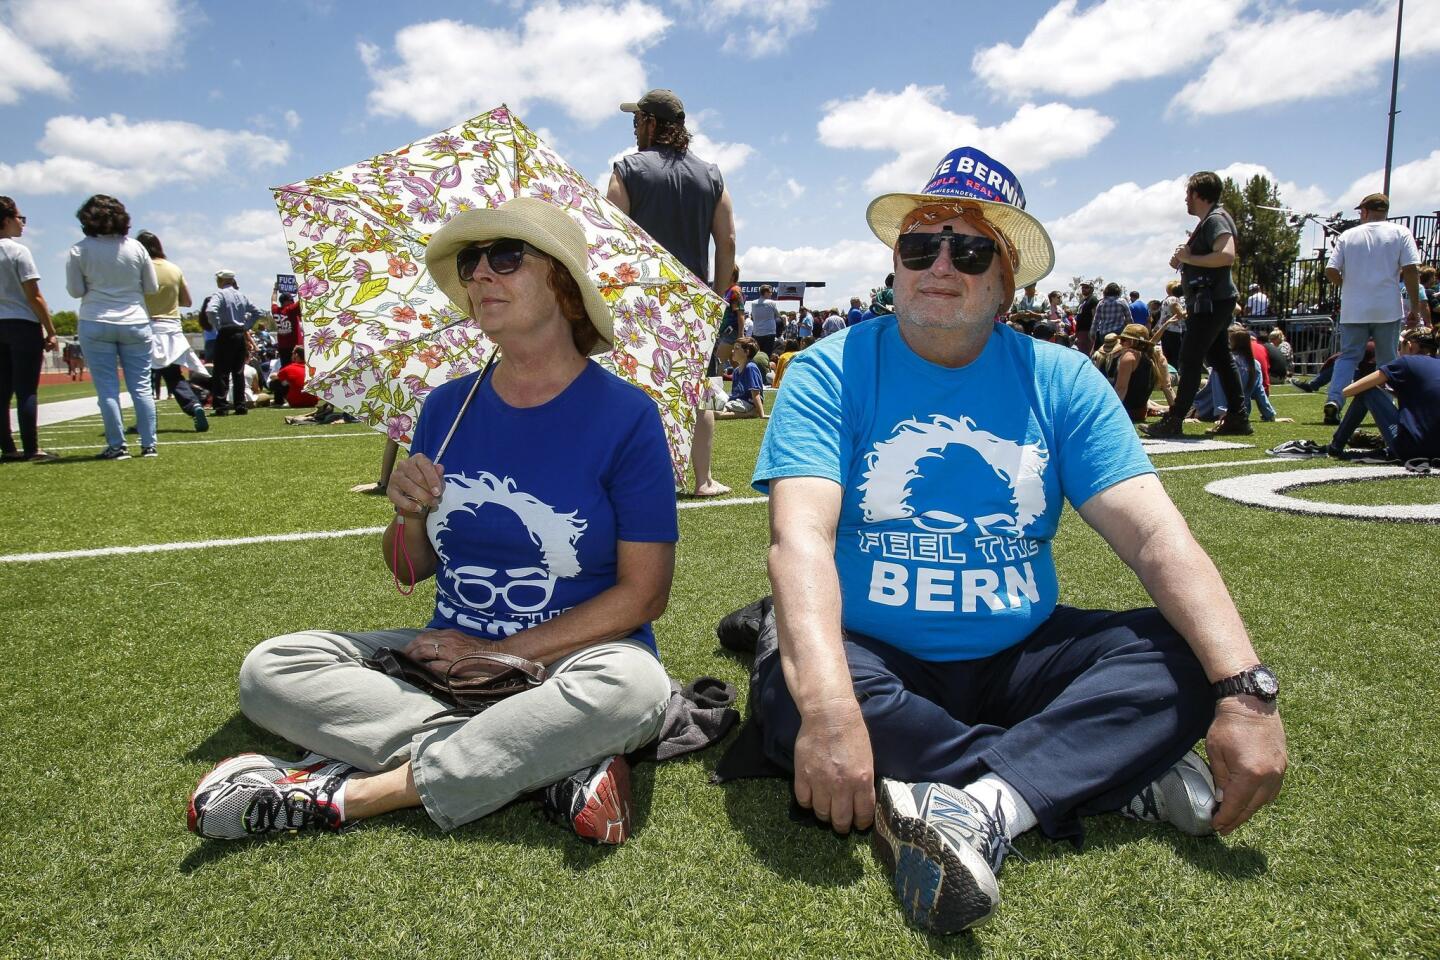 Robin Hampton and Jim Drogo, both from Fallbrook, sit on artificial turf as they and others wait to see Democratic presidential candidate Bernie Sanders.